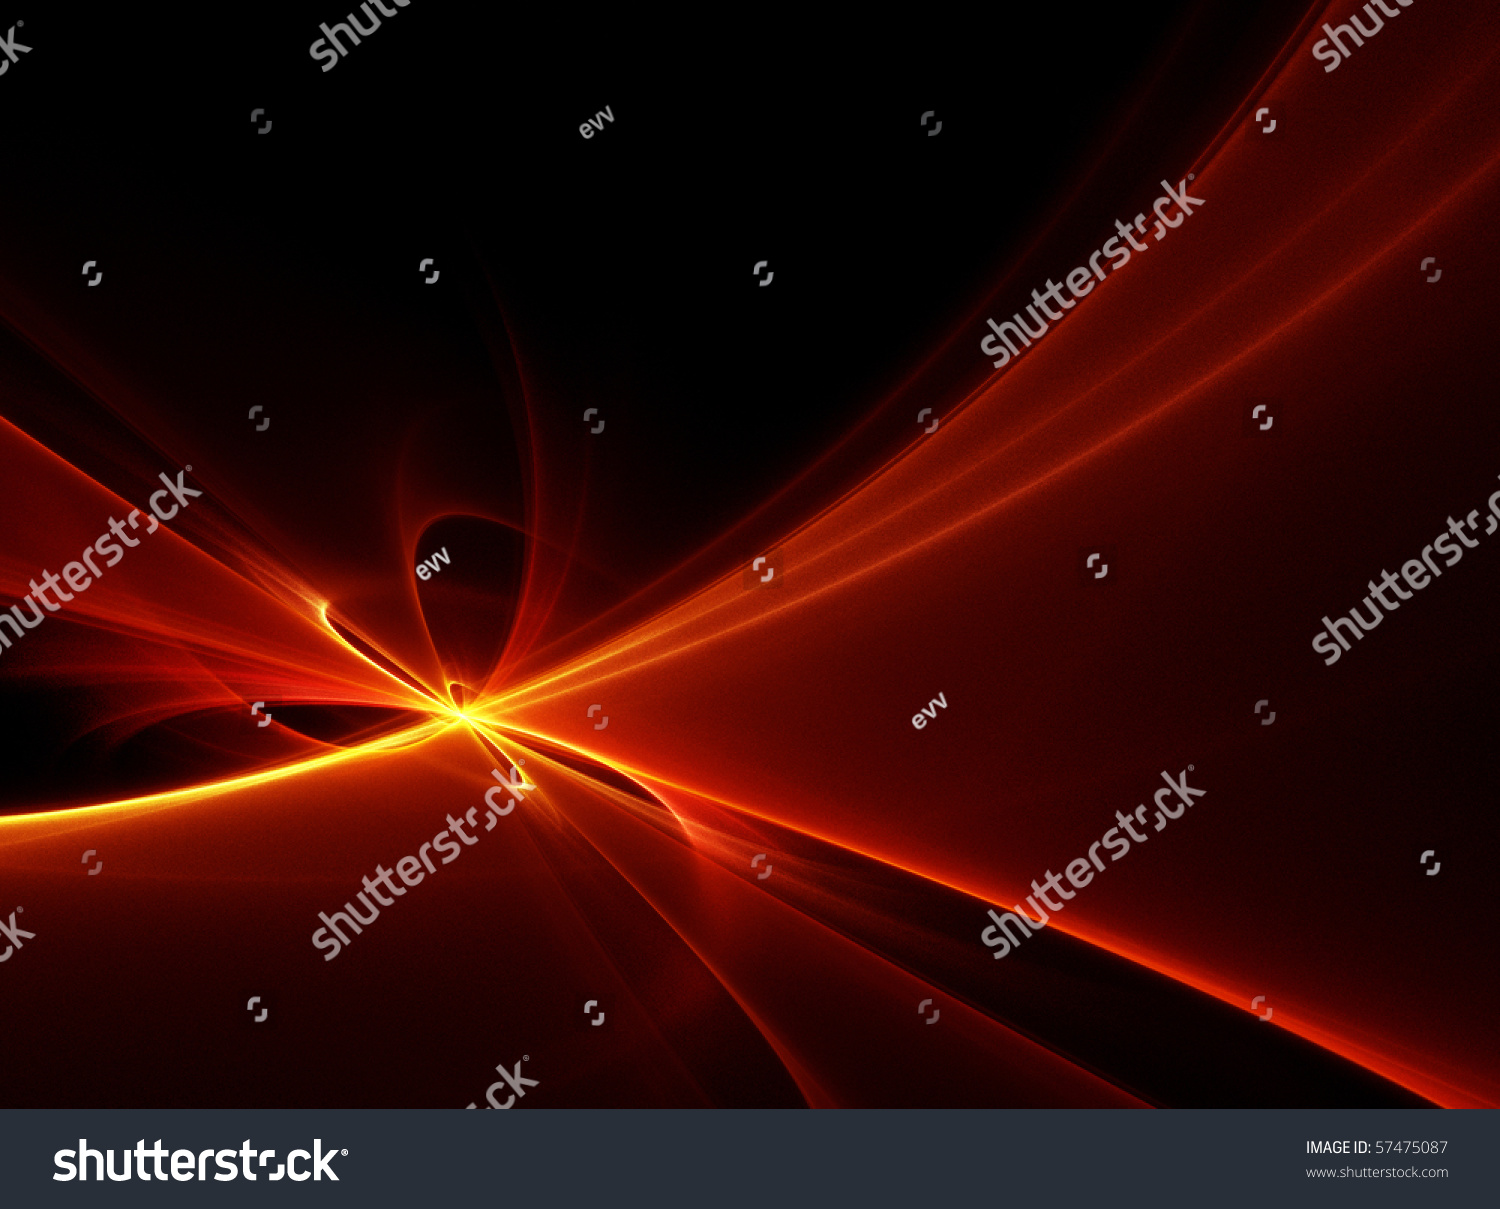 Abstract Red Lights Stock Photo 57475087 Shutterstock